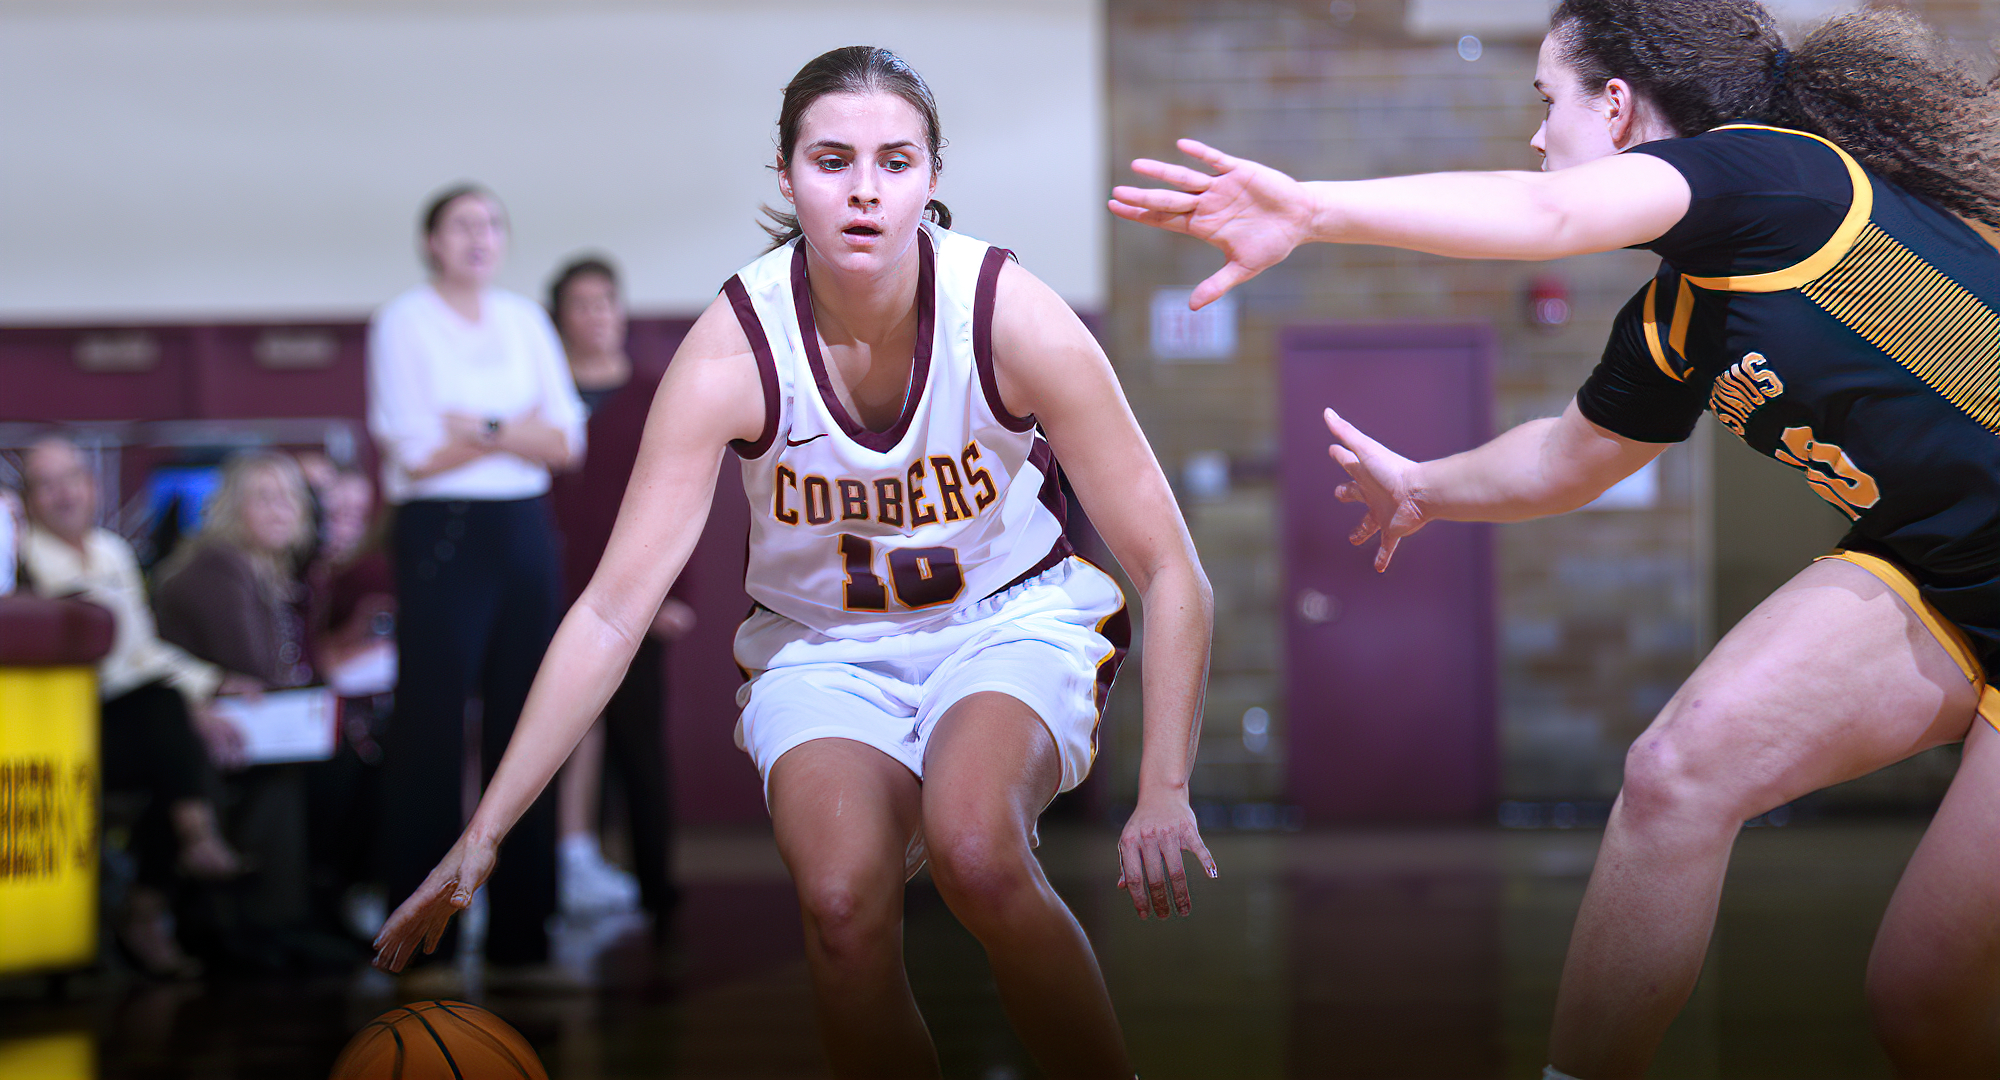 Sophomore Carlee Sieben went 5-for-9 from 3-point range and finished with a game-high 24 points in the Cobbers' game at Augsburg.